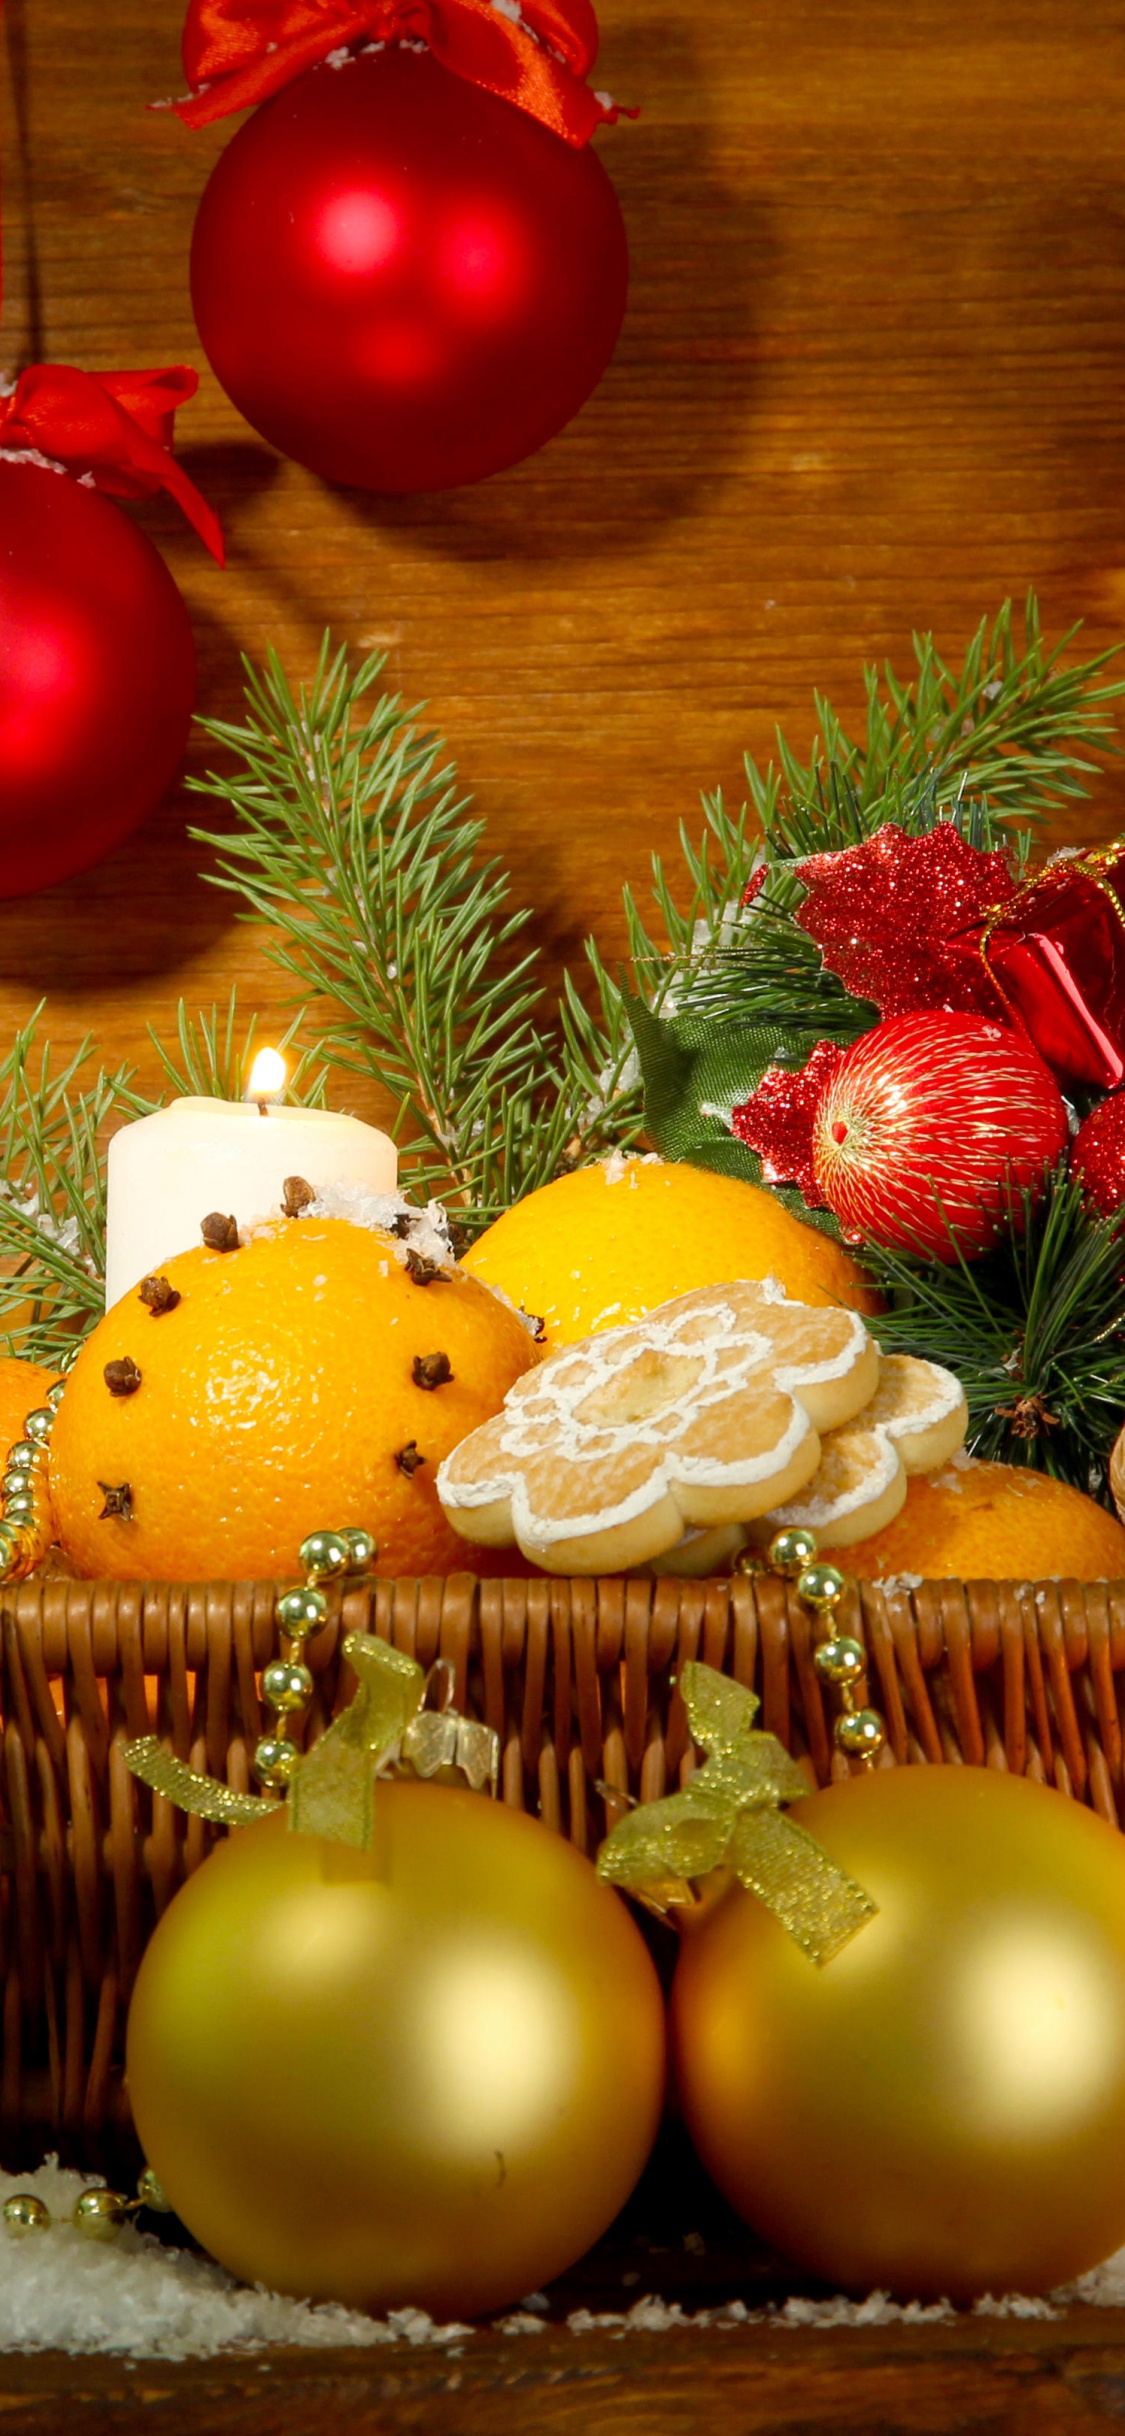 New Year, Christmas Day, Christmas Ornament, Christmas Decoration, Still Life. Wallpaper in 1125x2436 Resolution